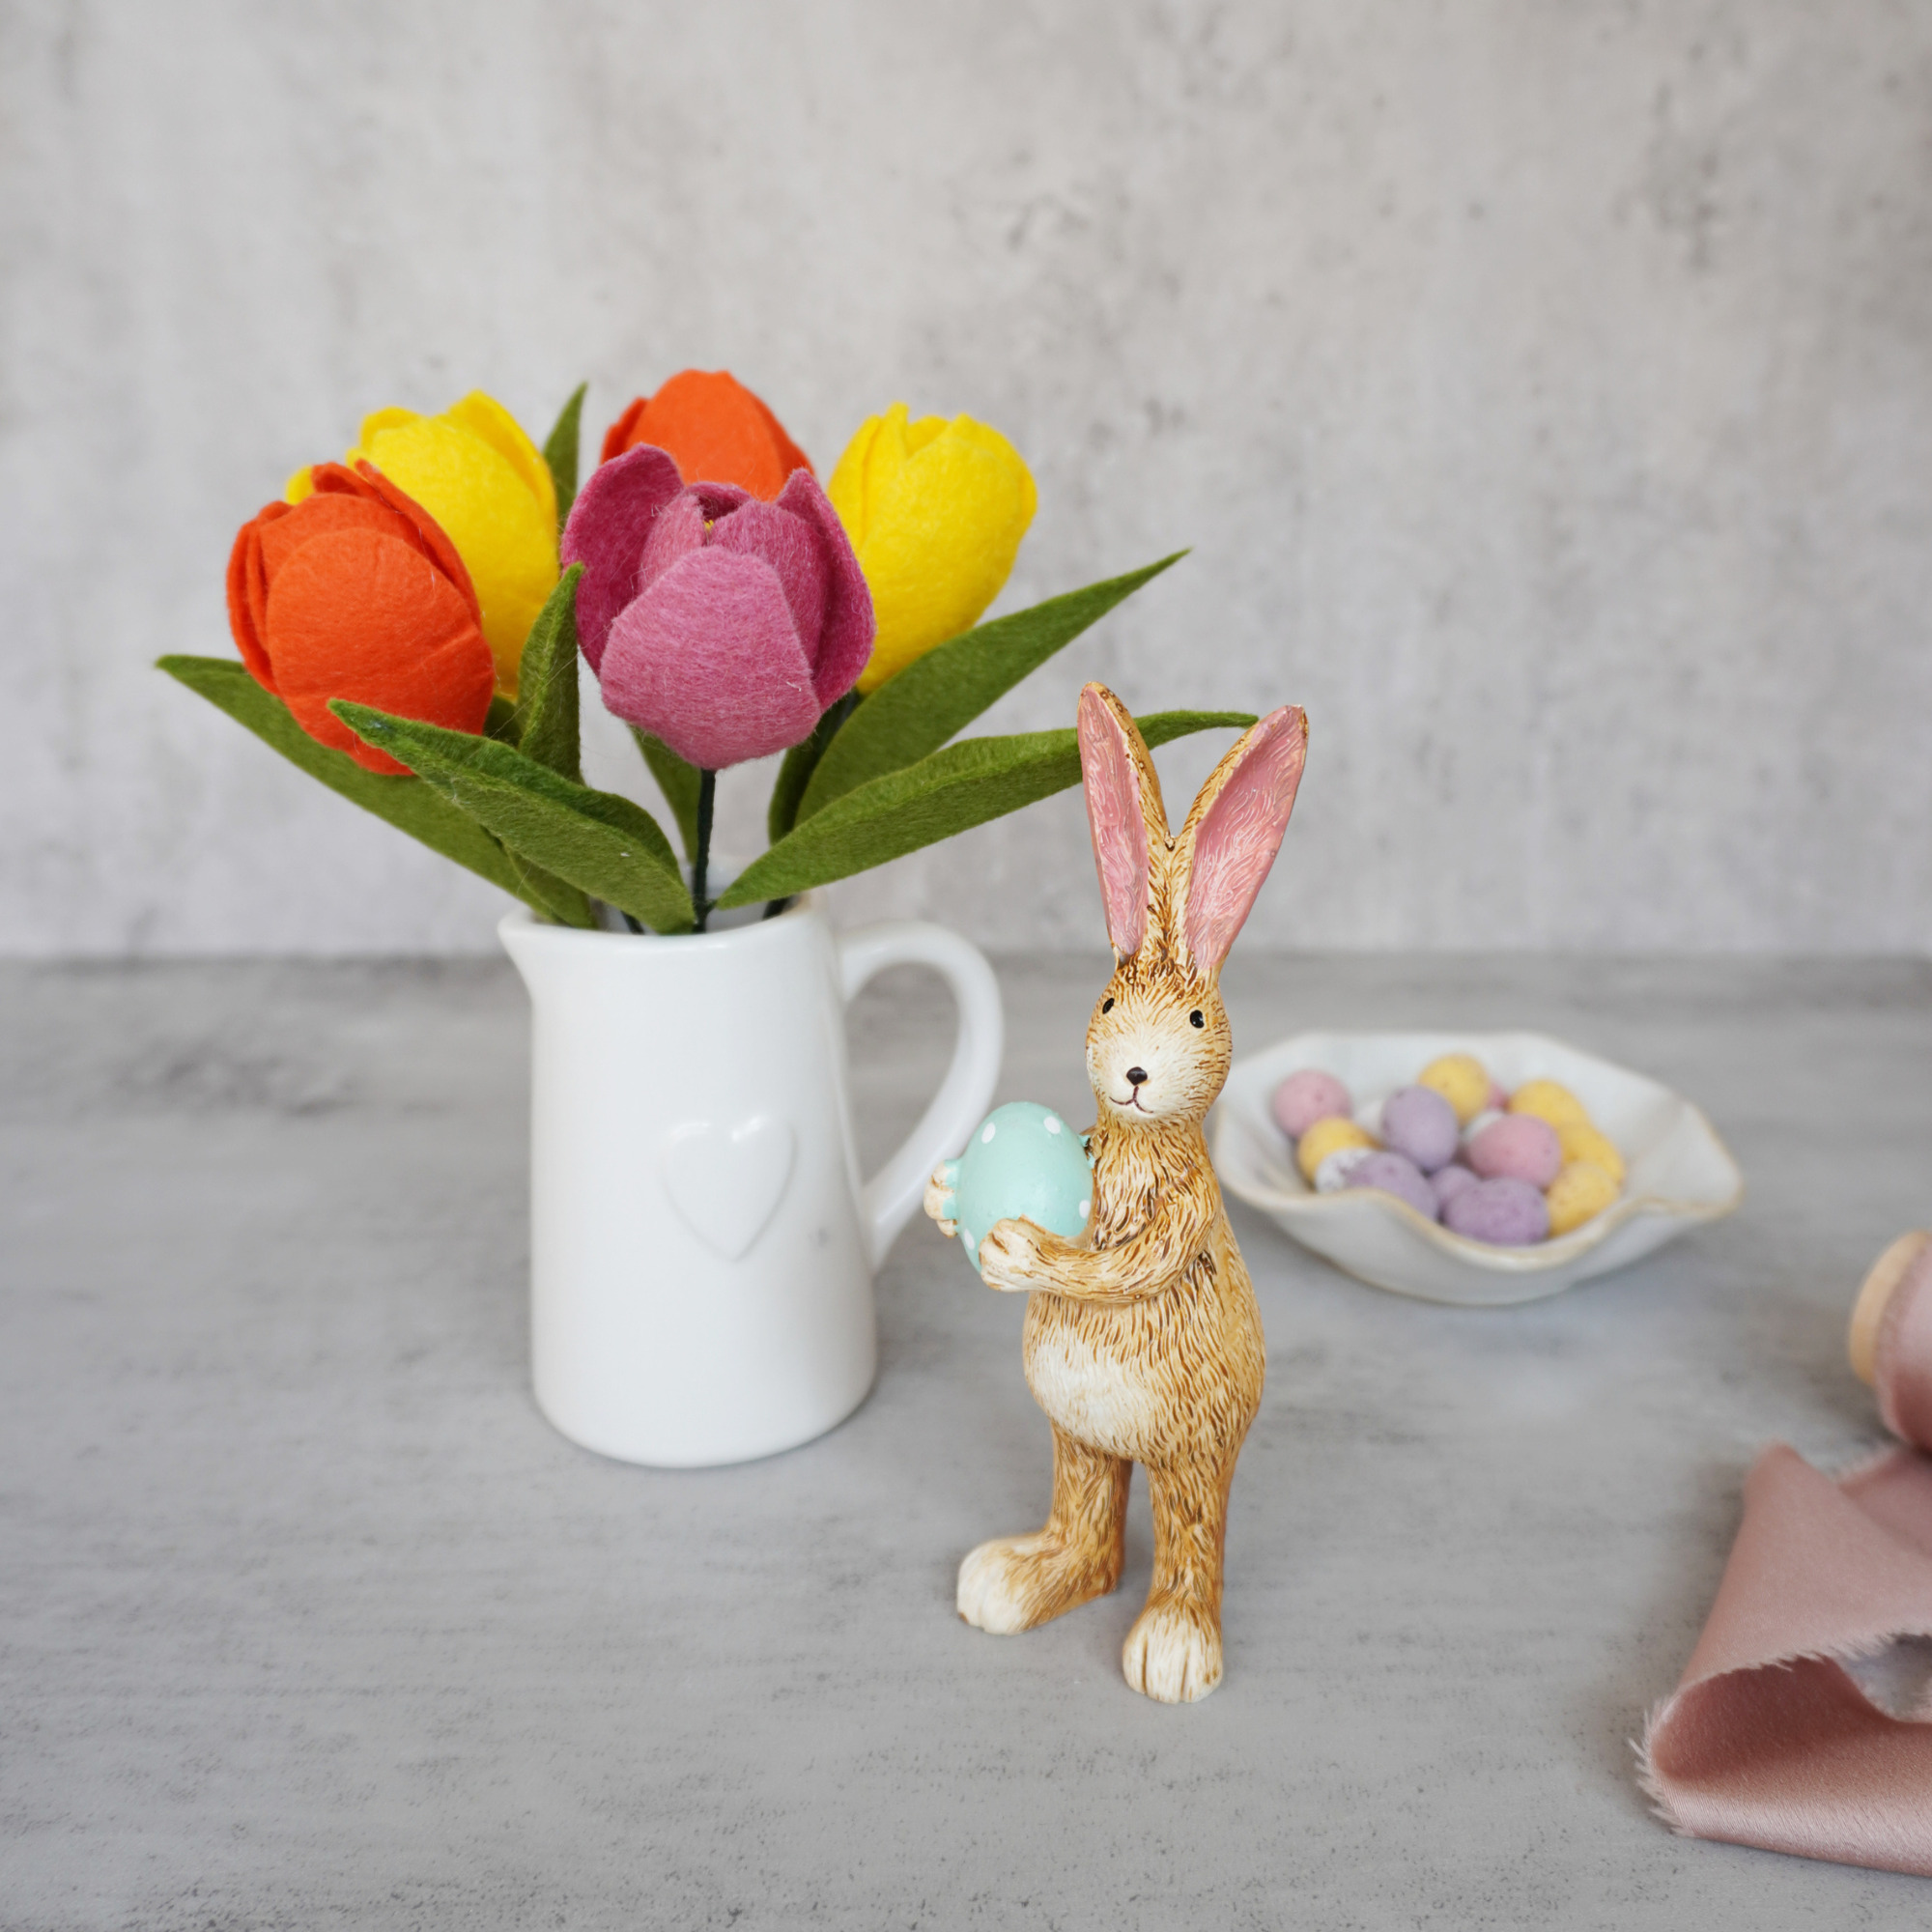 Easter Hamper felt flower Tulip bouquet with ceramic jar and a standing bunny - 6